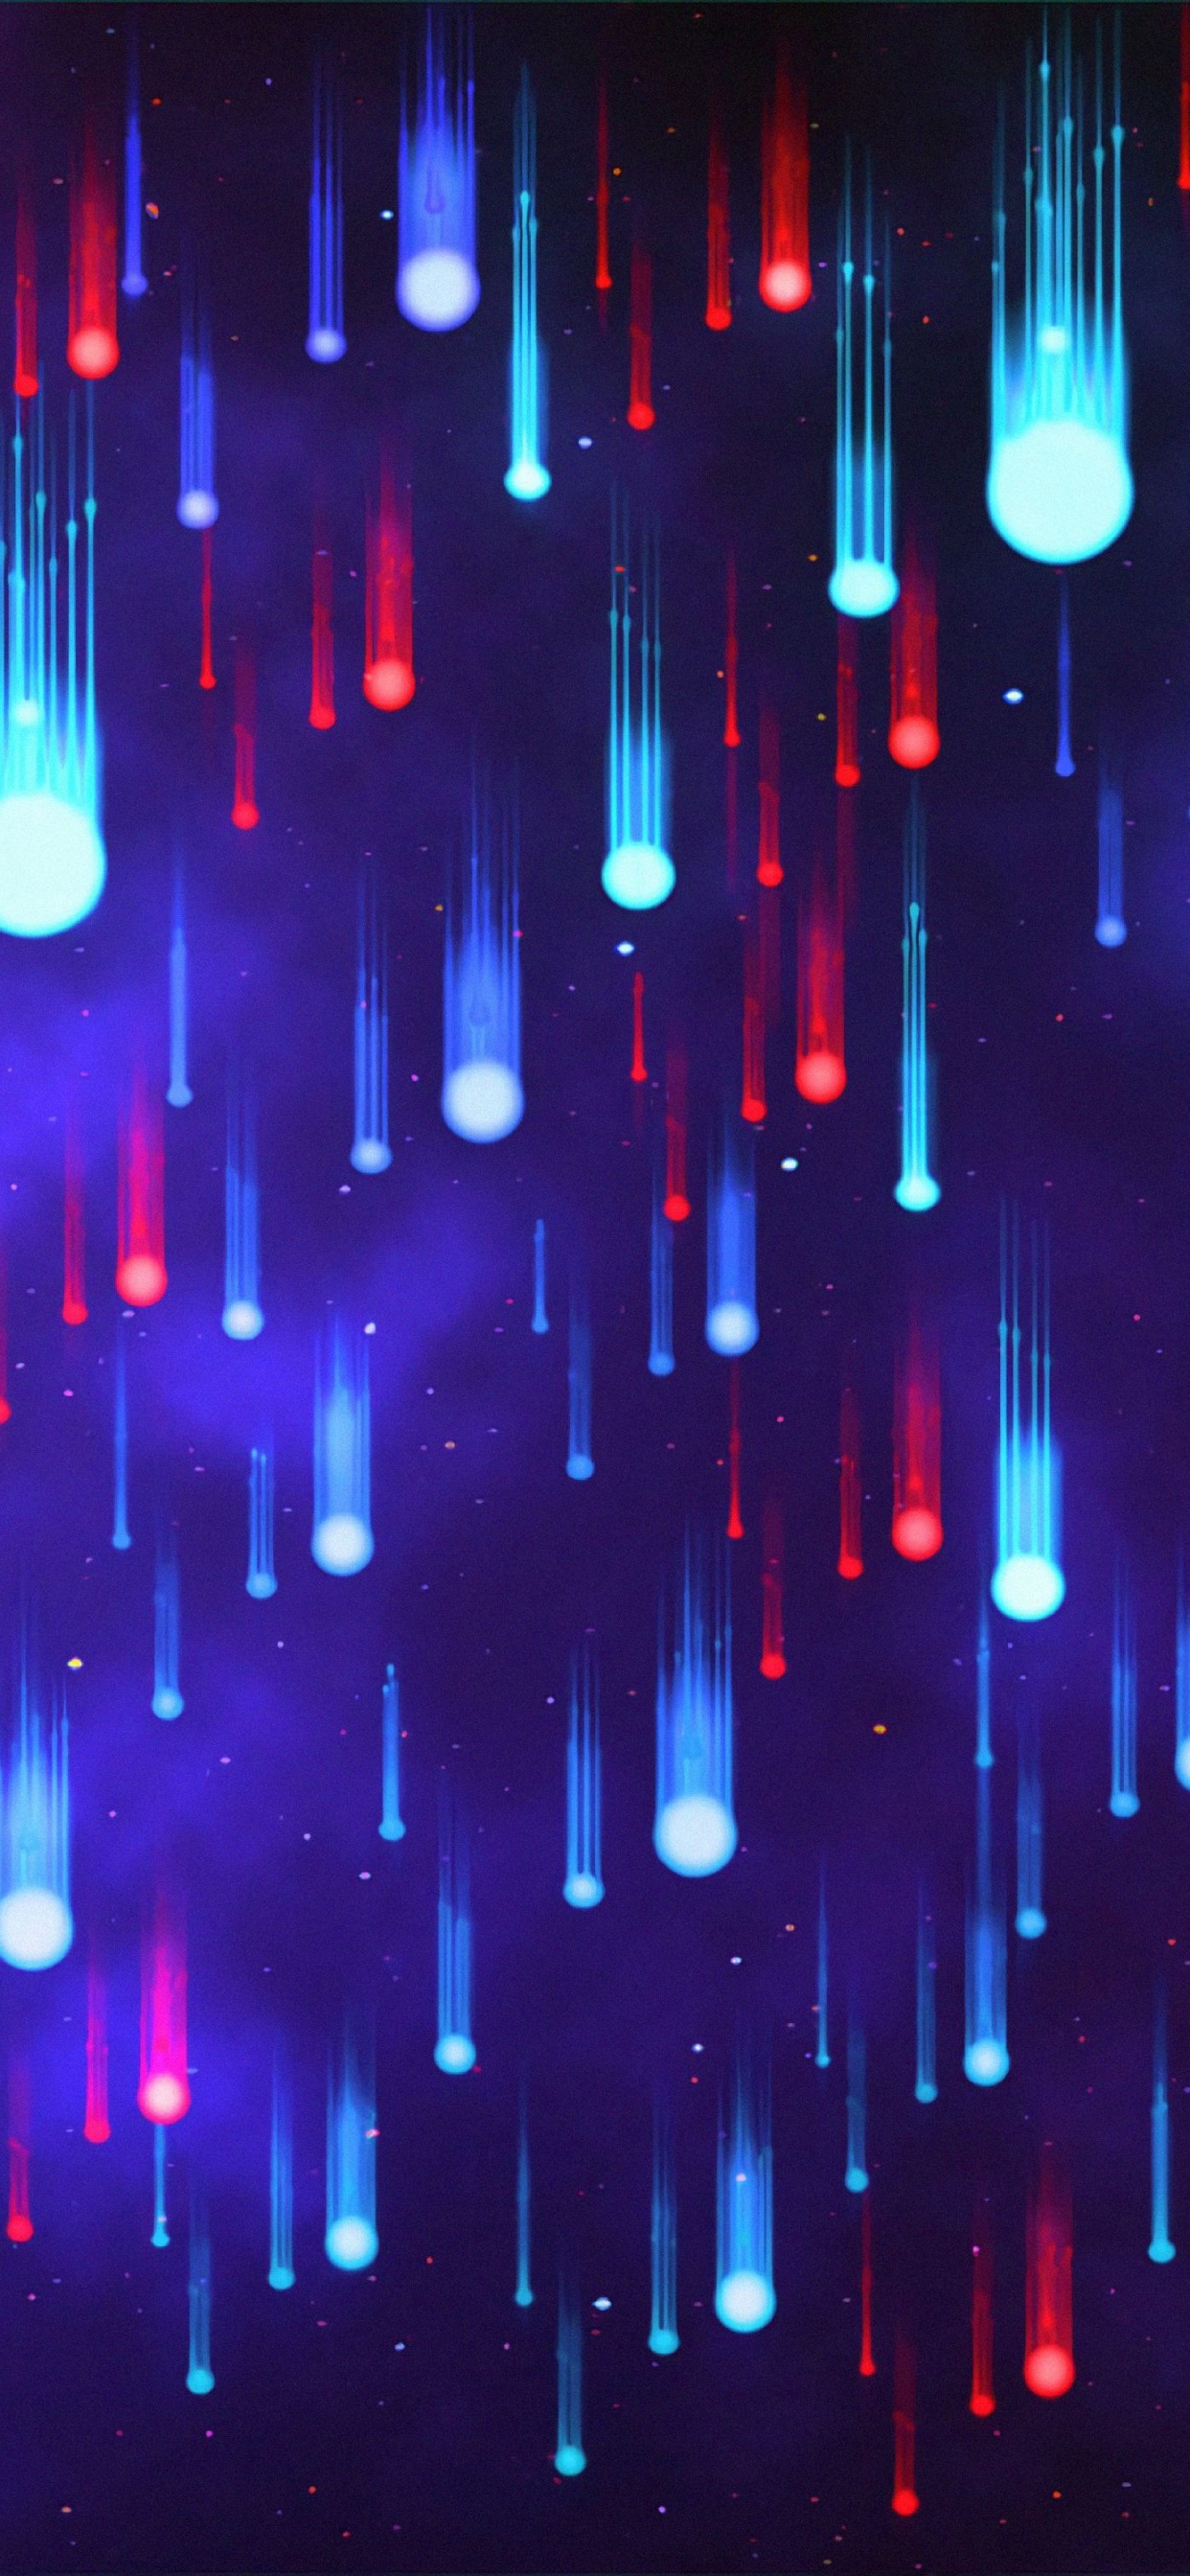 Pink and Blue Lights on a Dark Room. Wallpaper in 1242x2688 Resolution